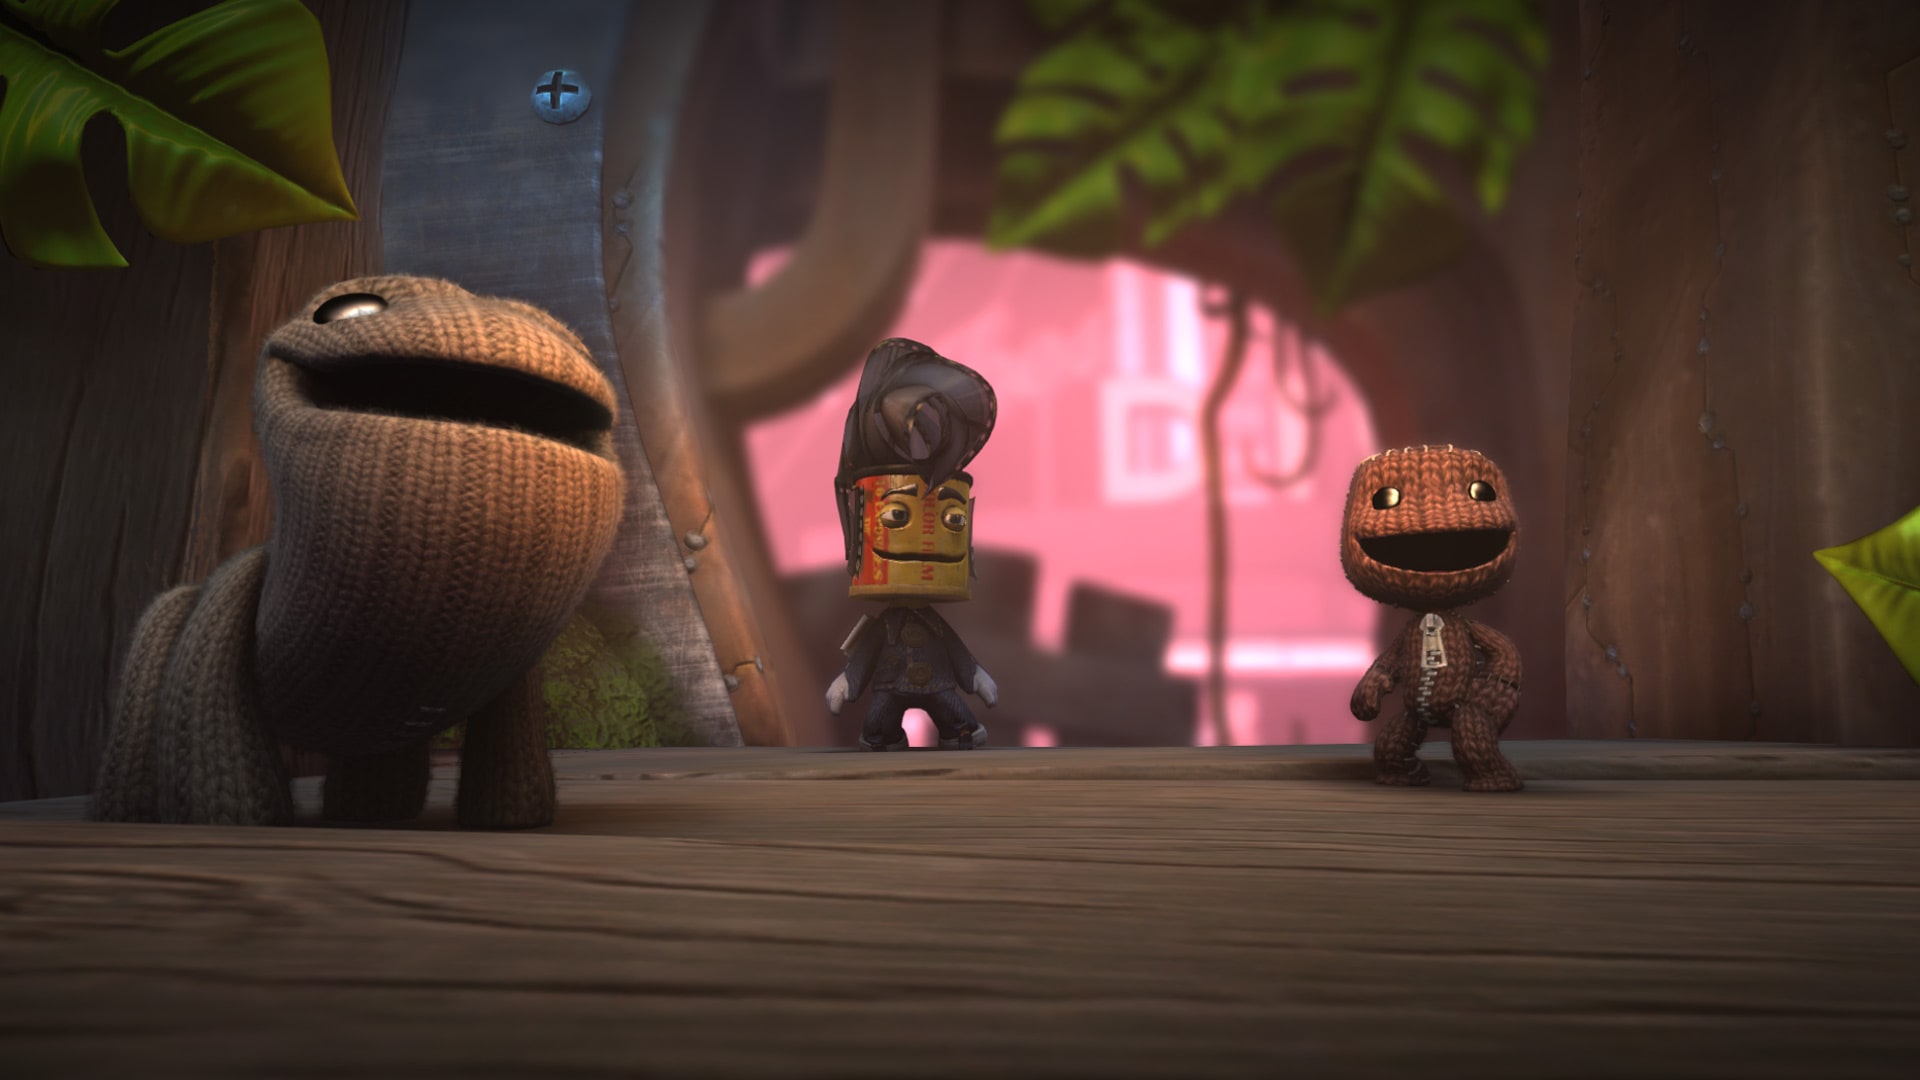 little big planet playstation store